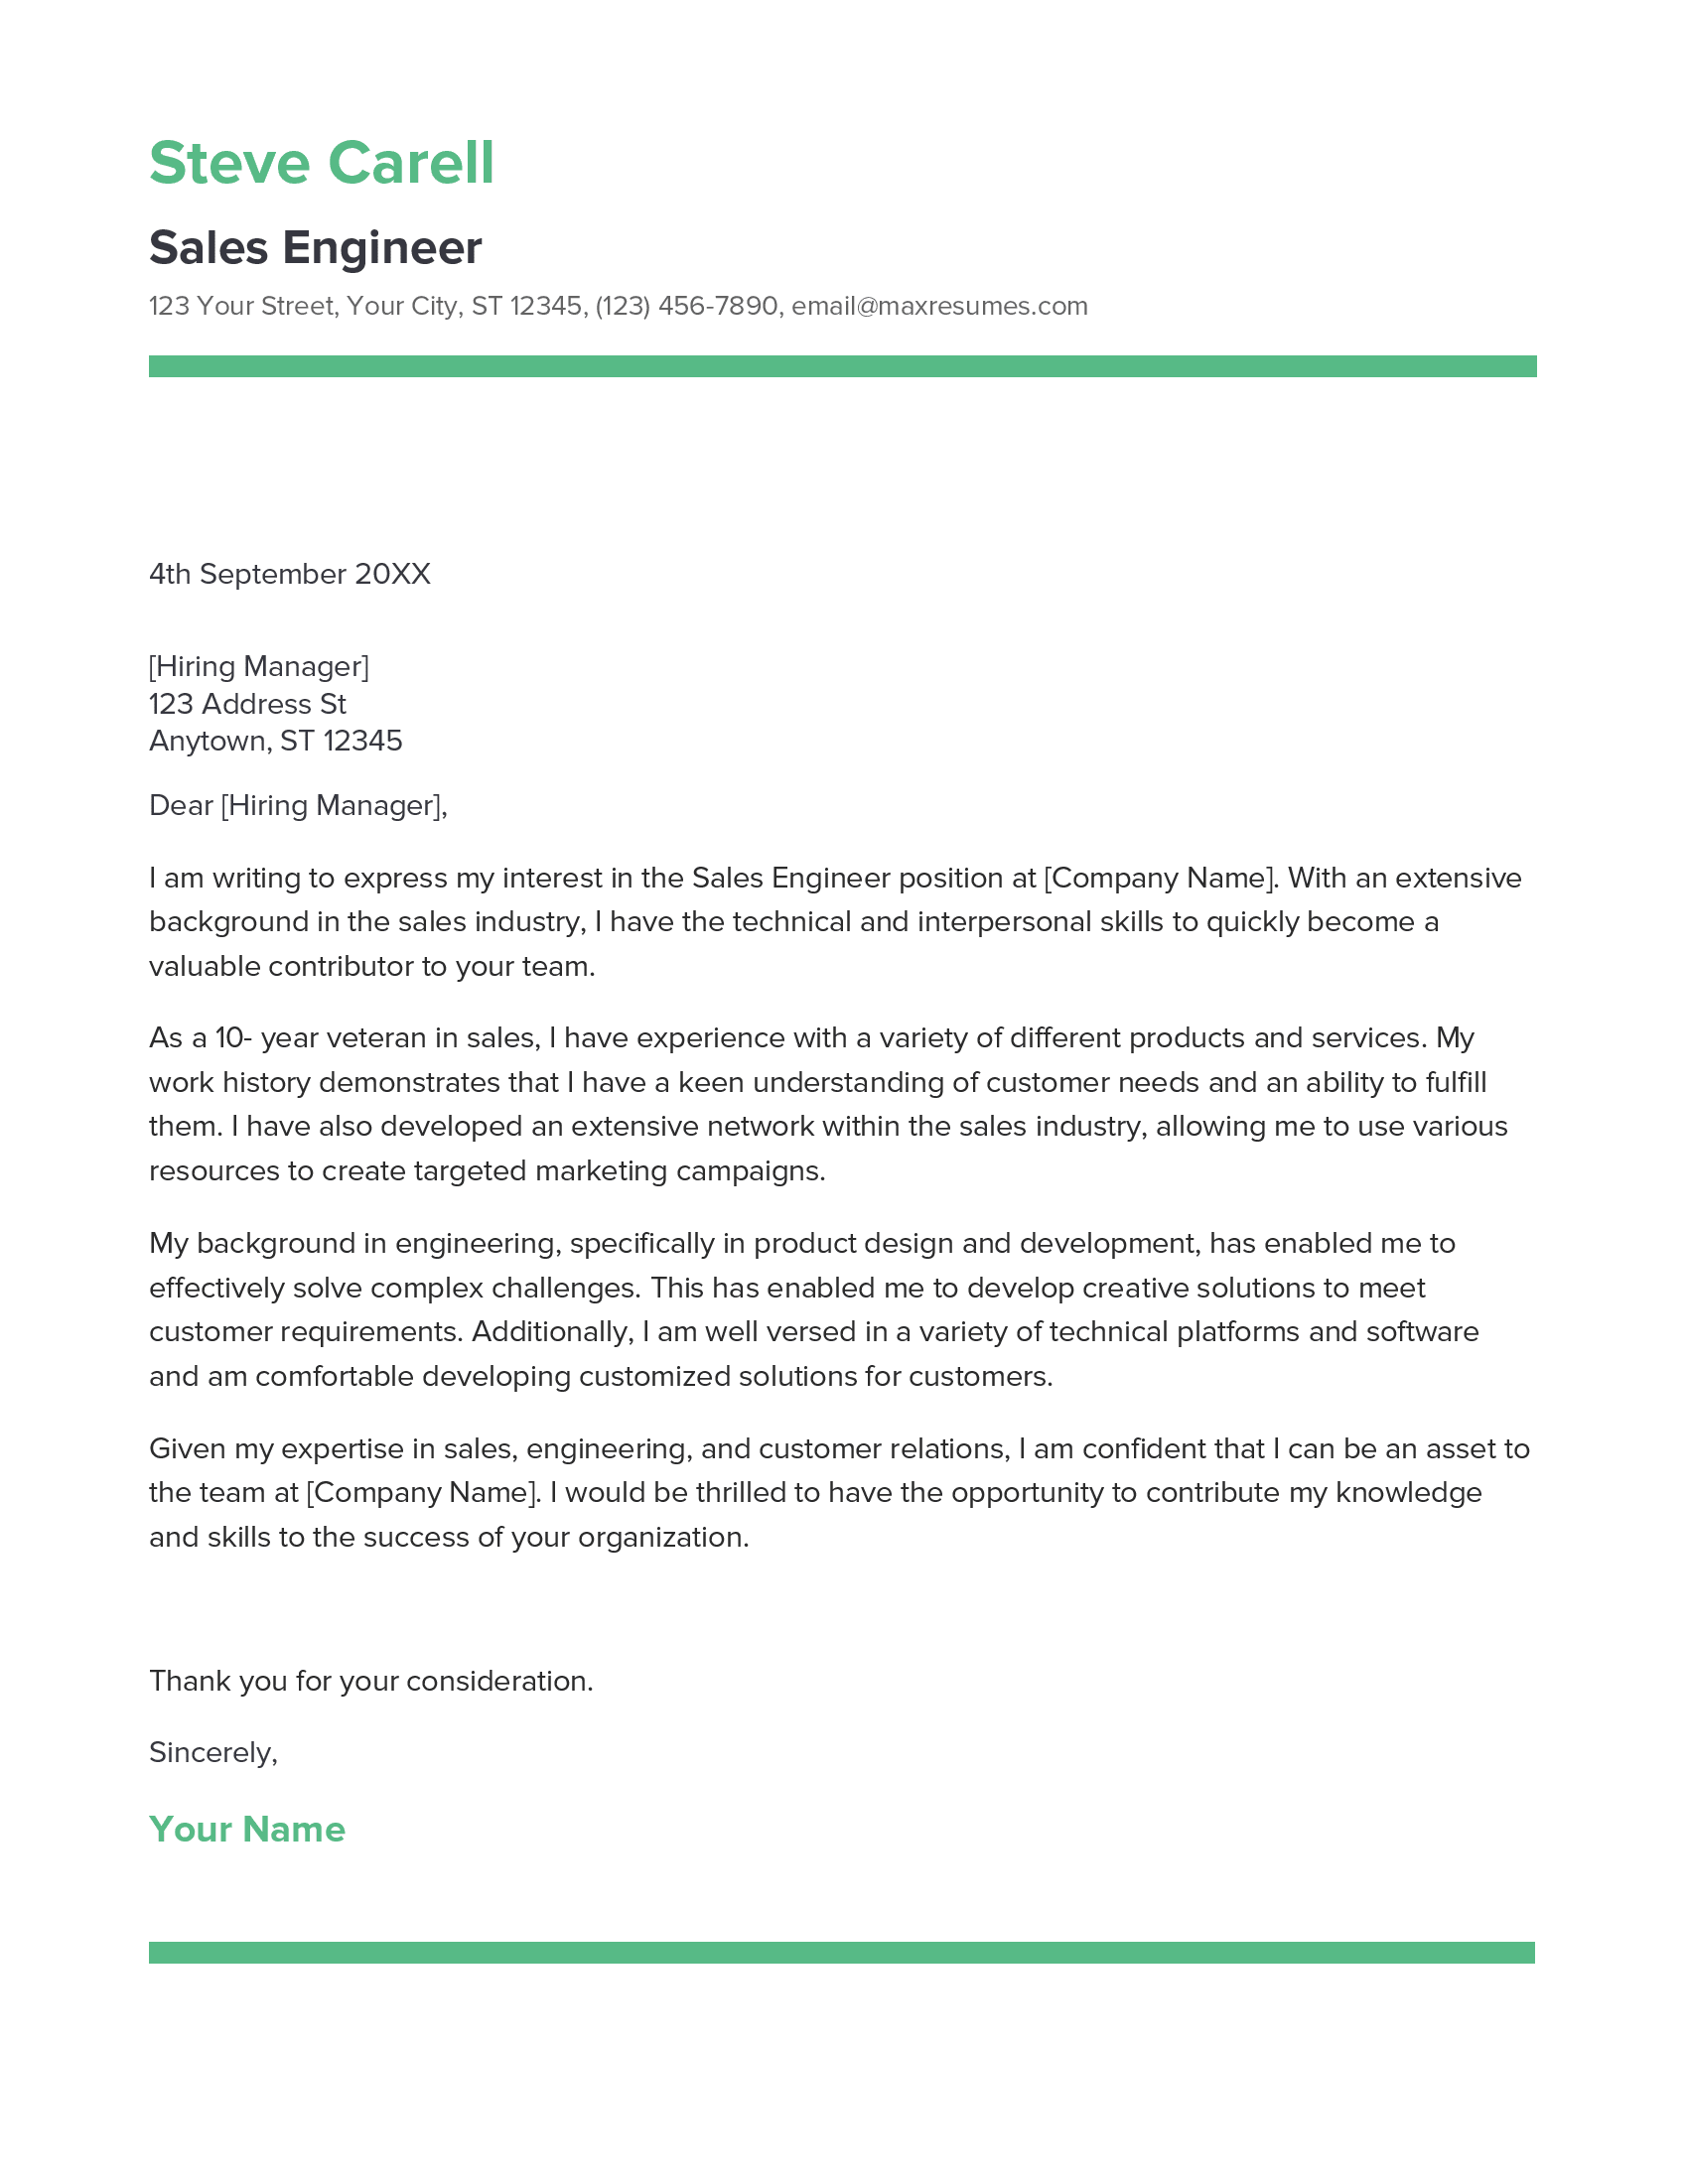 Sales Engineer Cover Letter Example